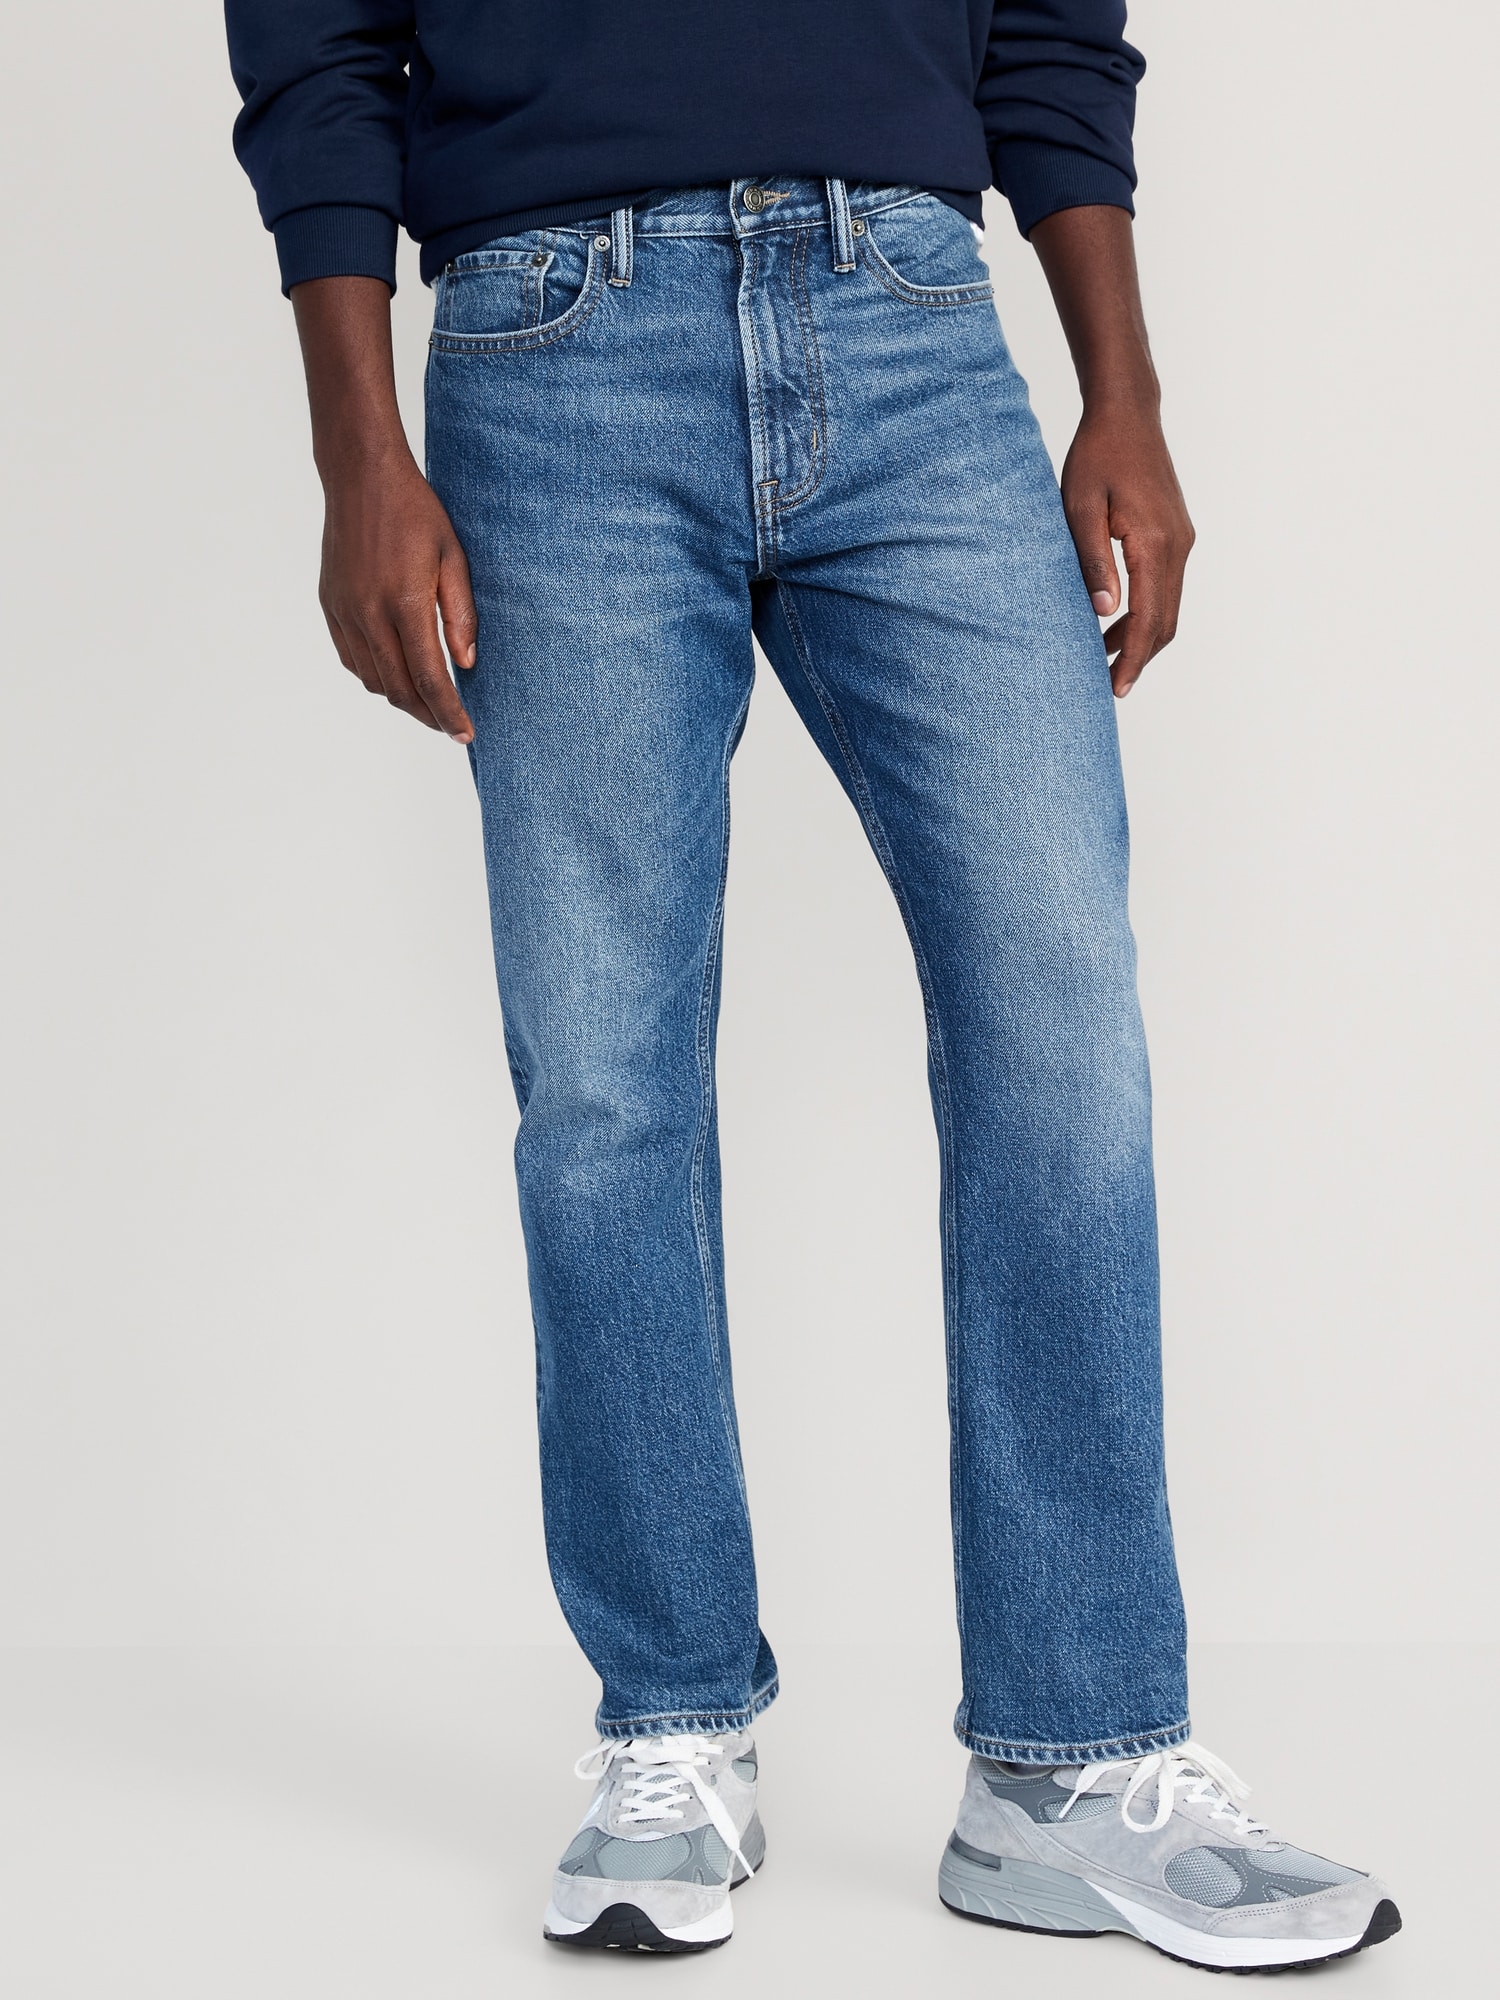 90's Straight Built-In Flex Jeans